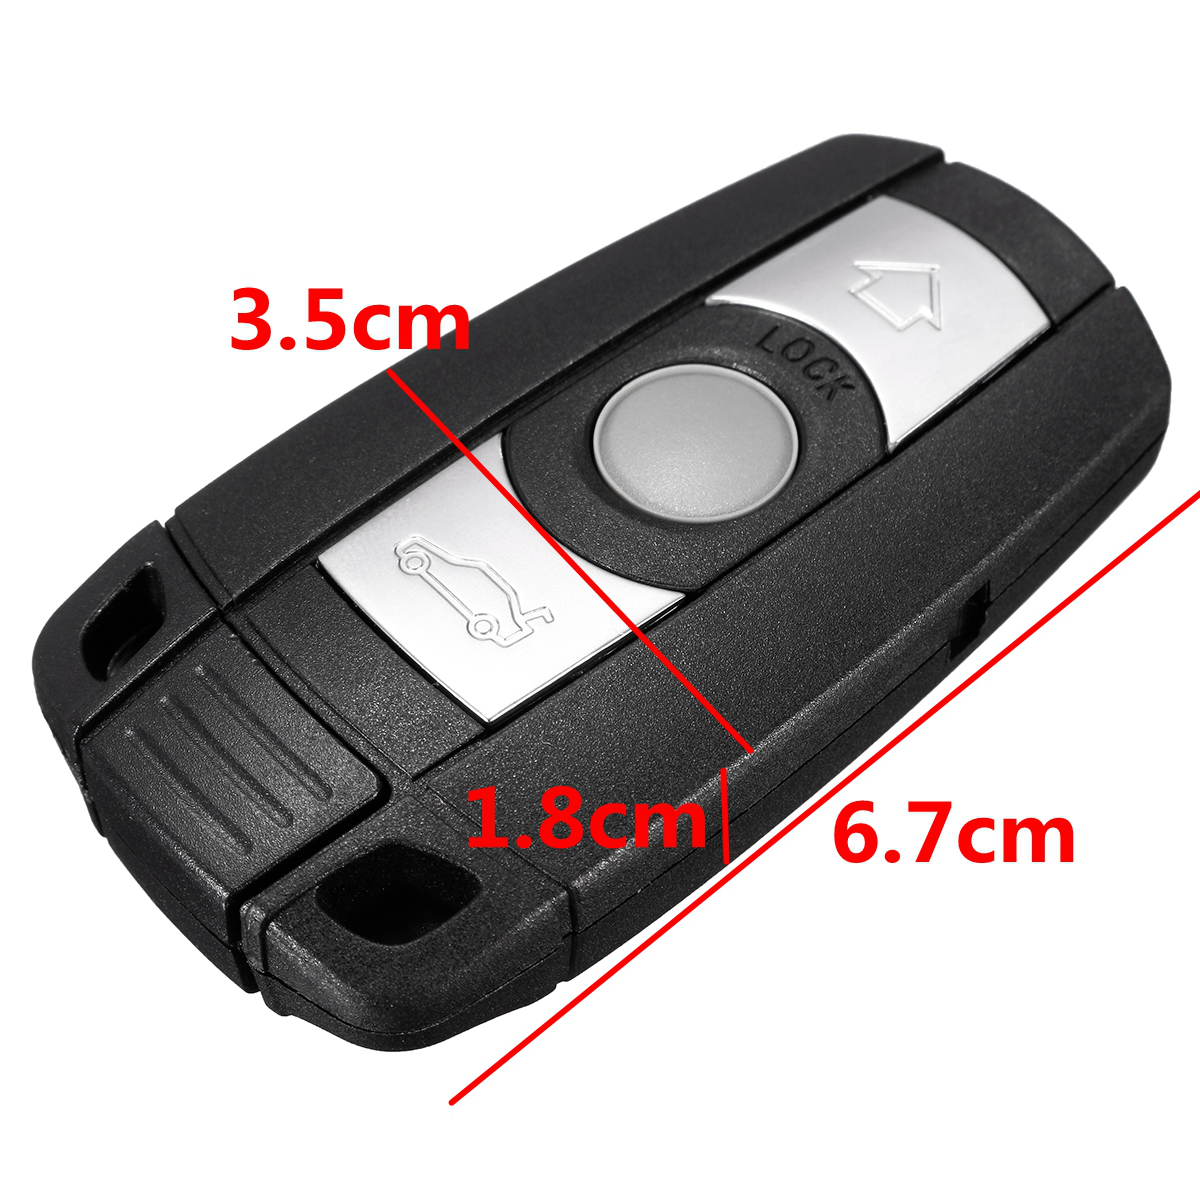 3 Buttons Remote Key Fob with CR2025 Battery for BMW 1 3 5 6 7 Series E90 E92 E93